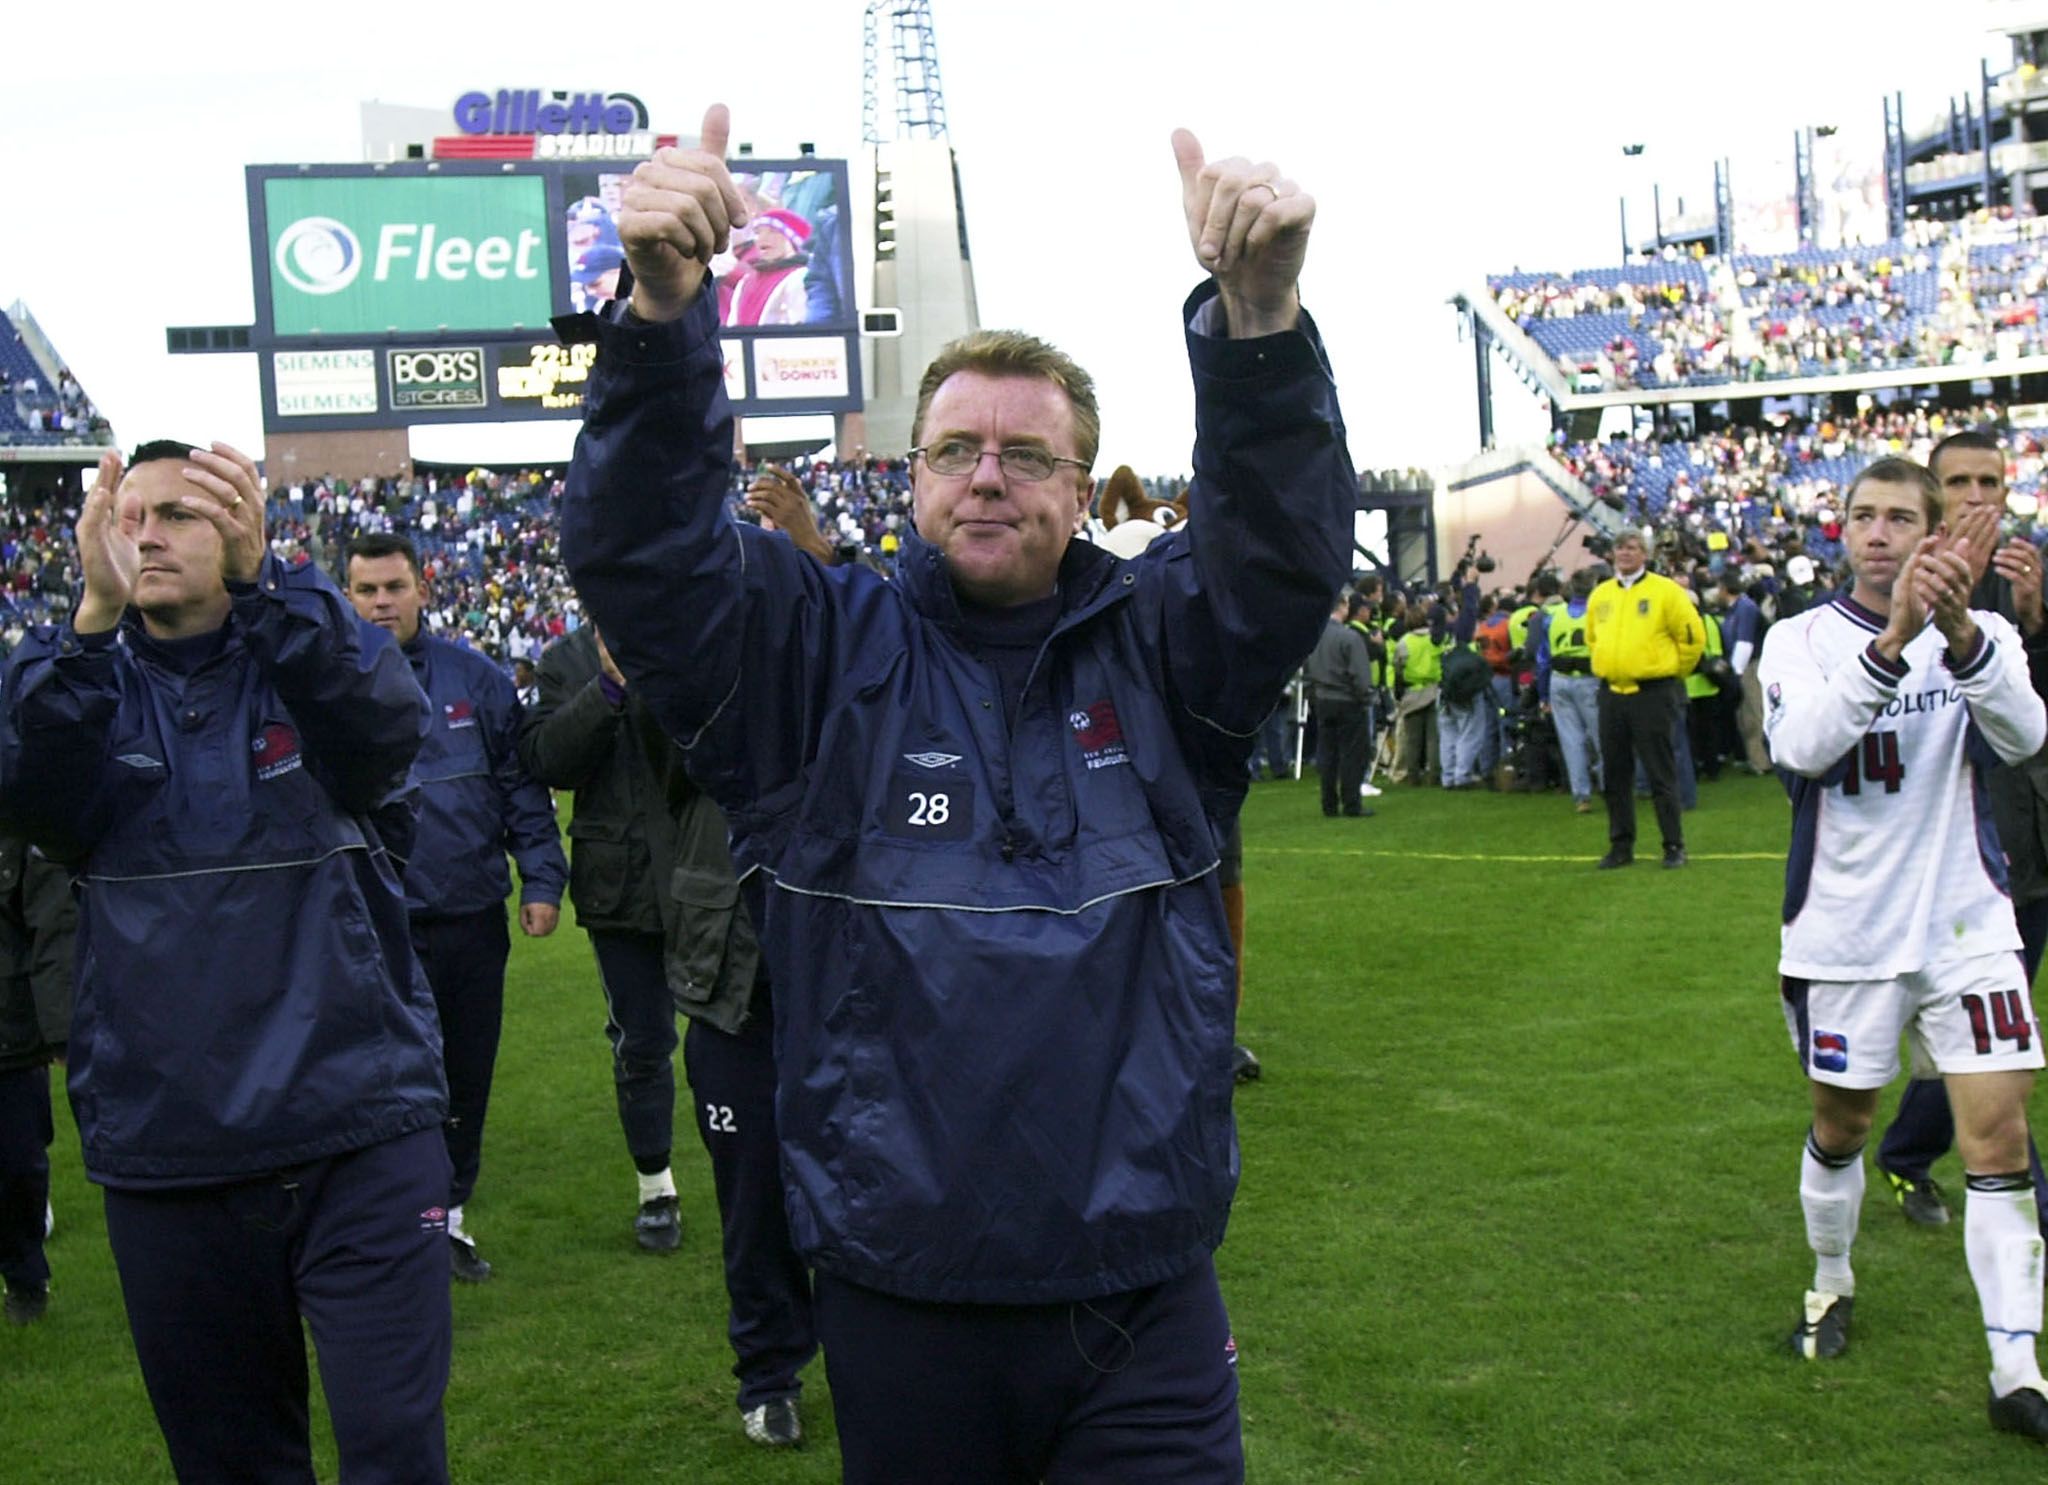 New England Revolution's interim head coach Steve Nicol (C) signals to
the crowd following the Revolution's 1-0 overtime loss to the Los
Angeles Galaxy, in the MLS Soccer Championships in Foxboro
Massachusetts, October 20, 2002. REUTERS/CJ Gunther

CJG/HB